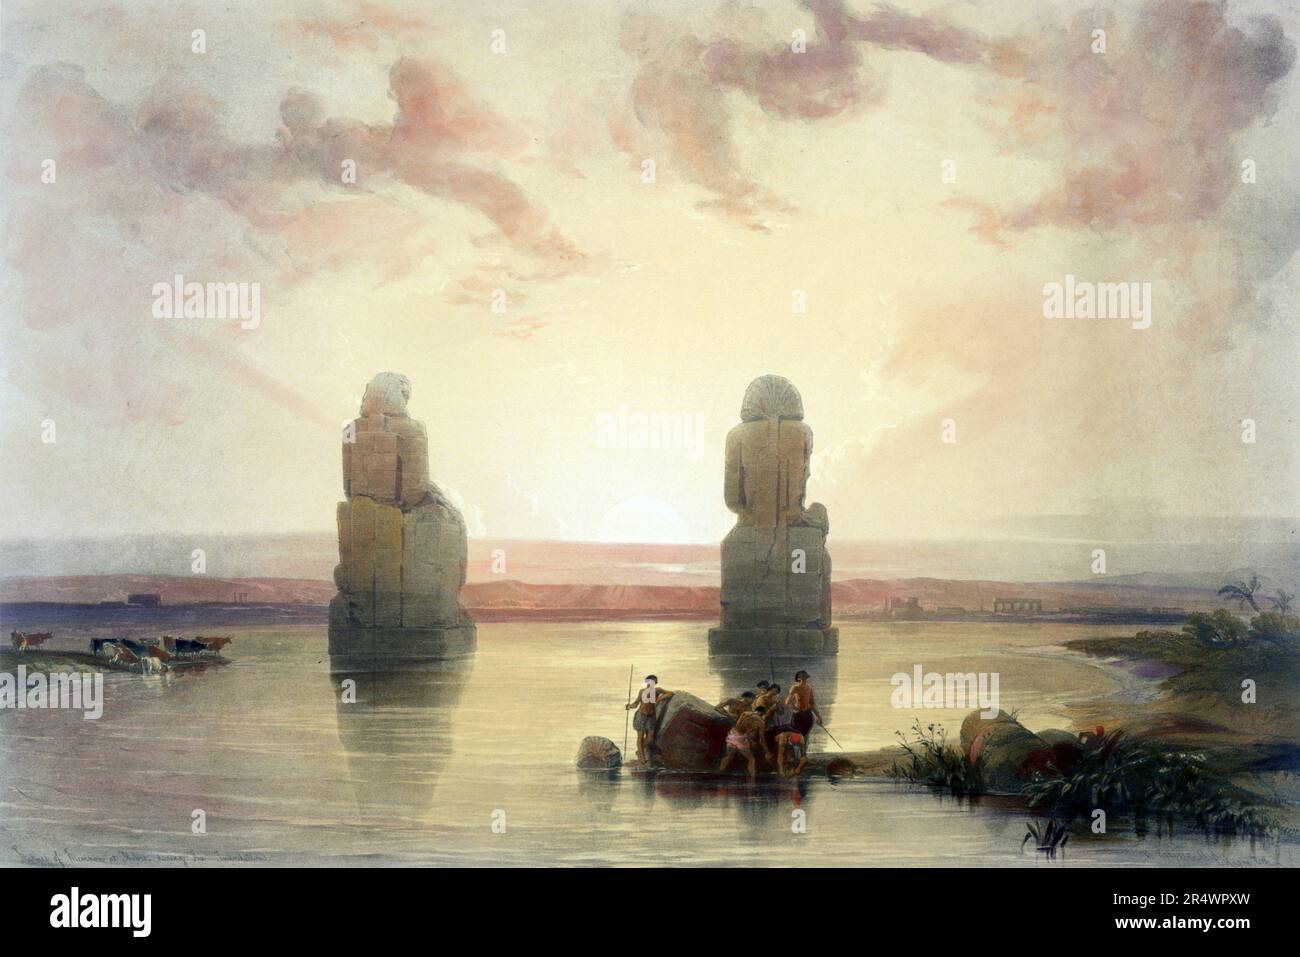 The Statues of Memnon, Thebes, During the Inundations', Watercolour.   David Roberts (1796-1864) Scottish artist and orientalist. The Colossi near the Valley of the Kings, Egypt, built by Amenhotep II (c1411-1375 BC). Stock Photo